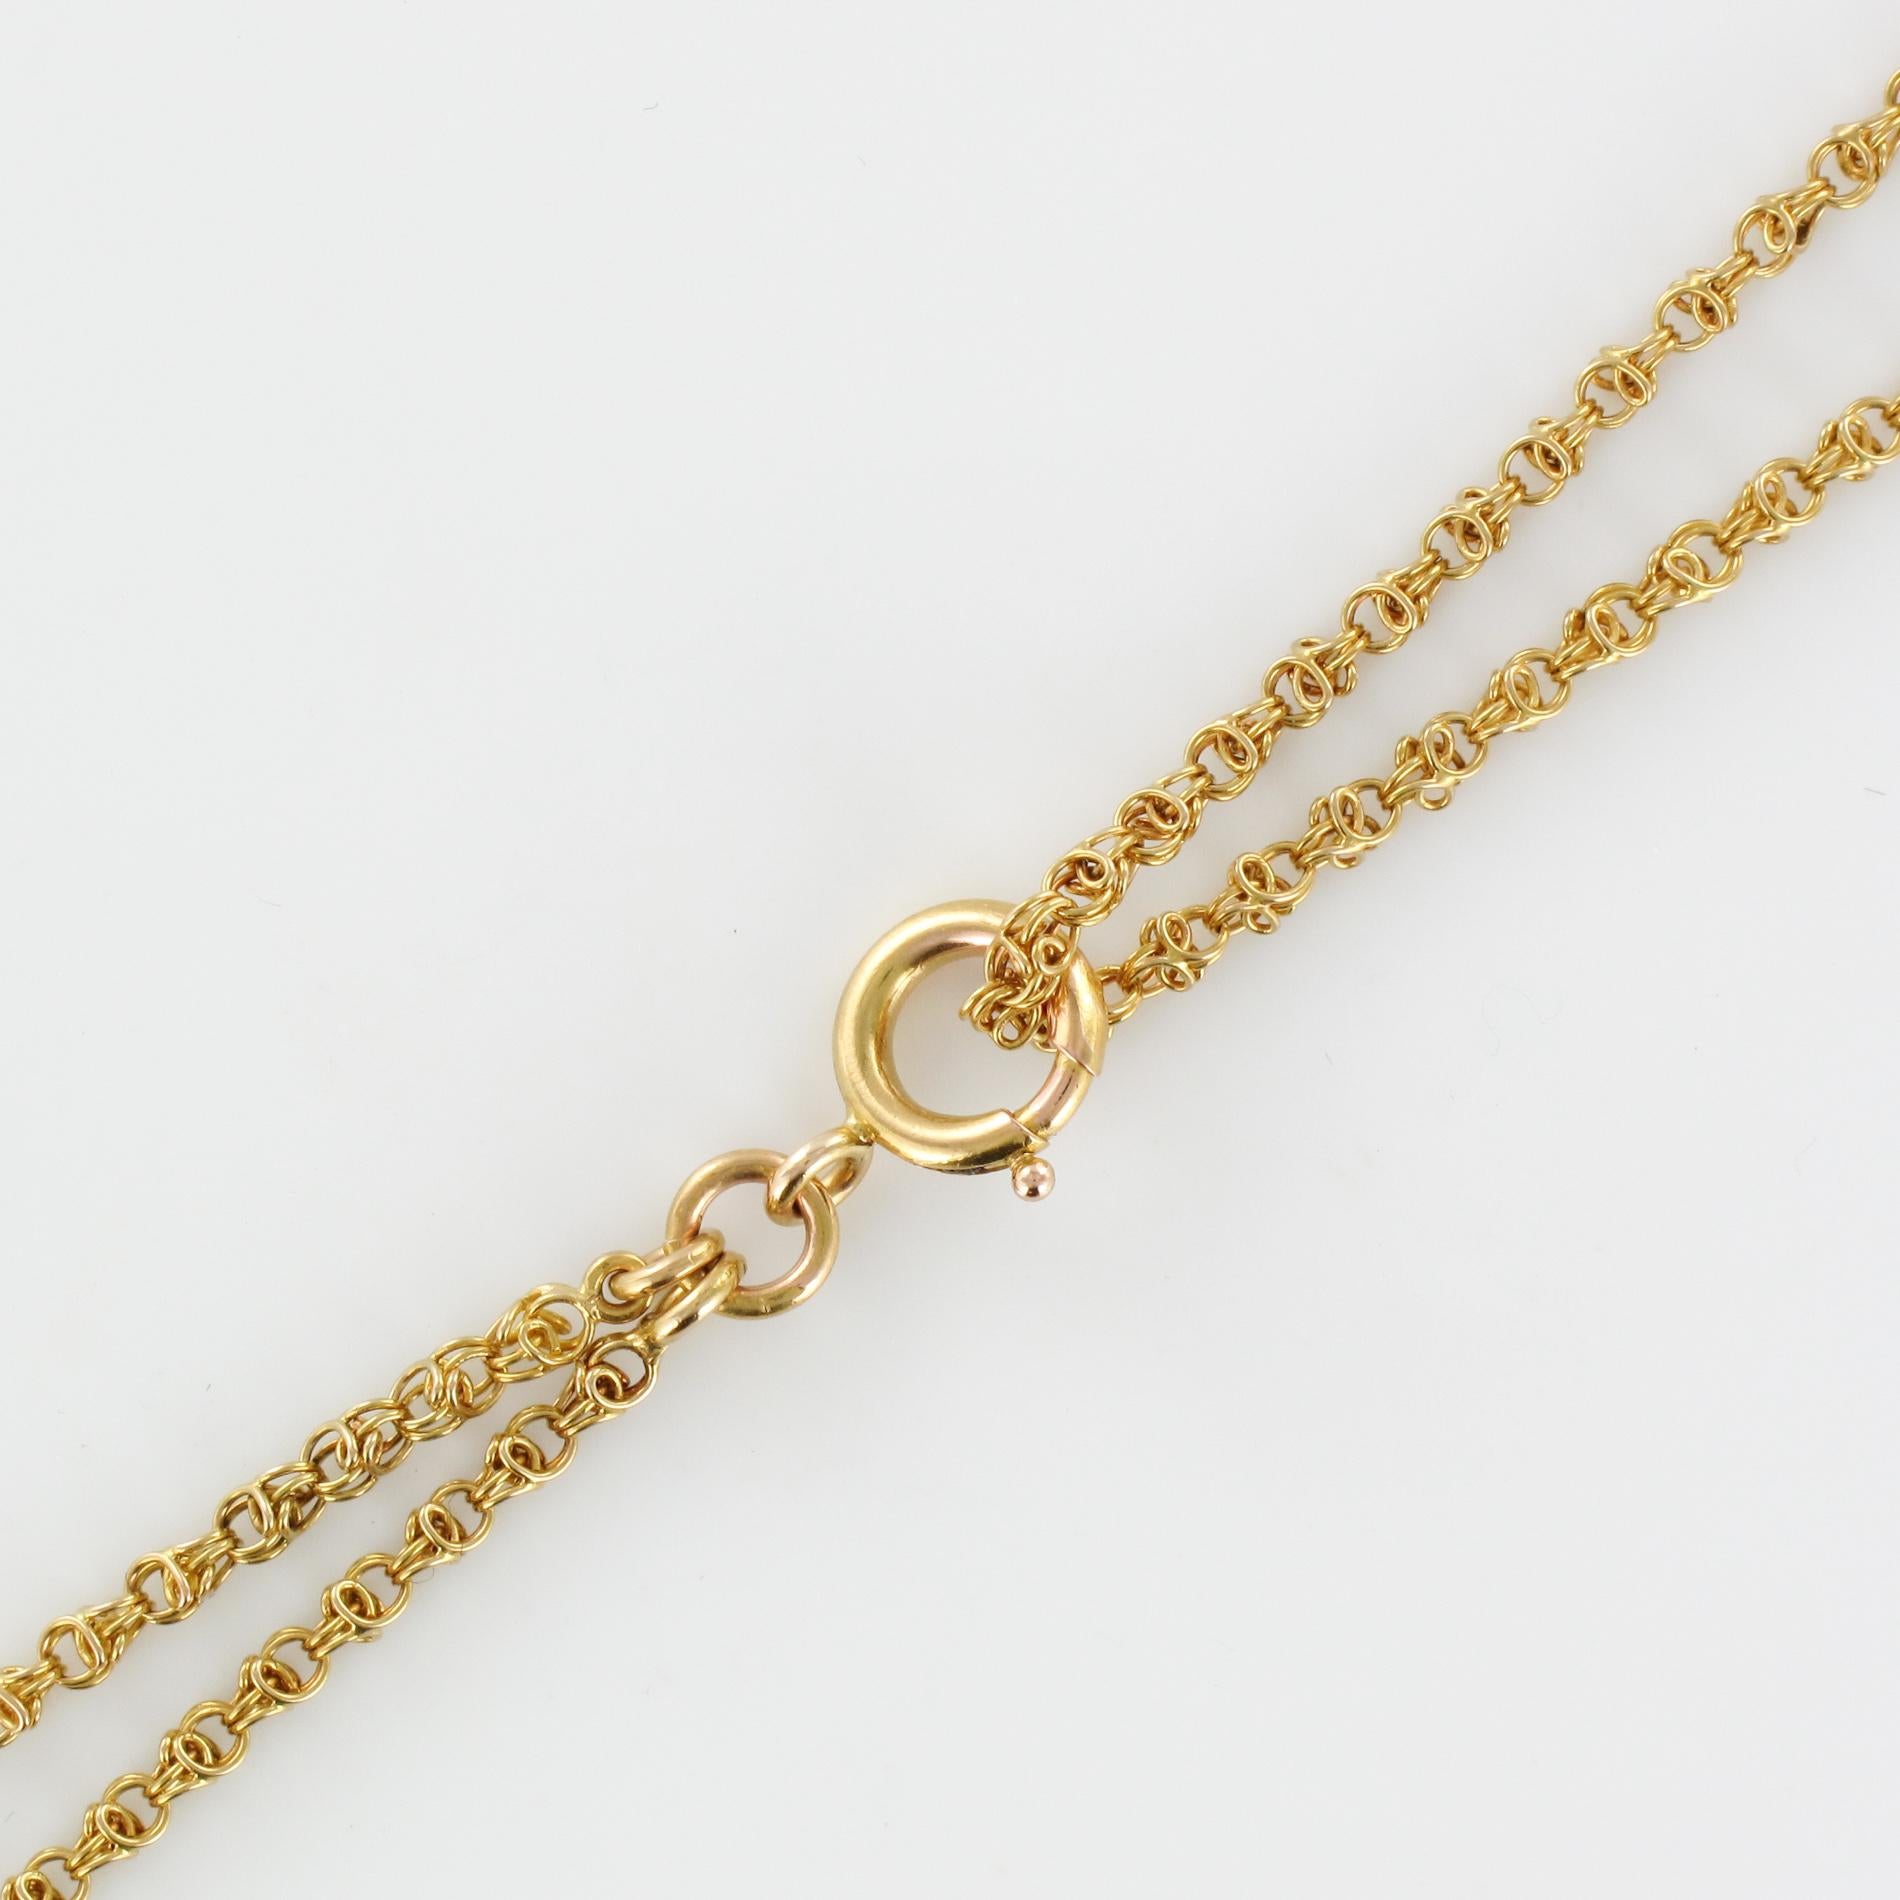 Napoleon 3 French 18 Karat Yellow Gold Long Chain Necklace 3